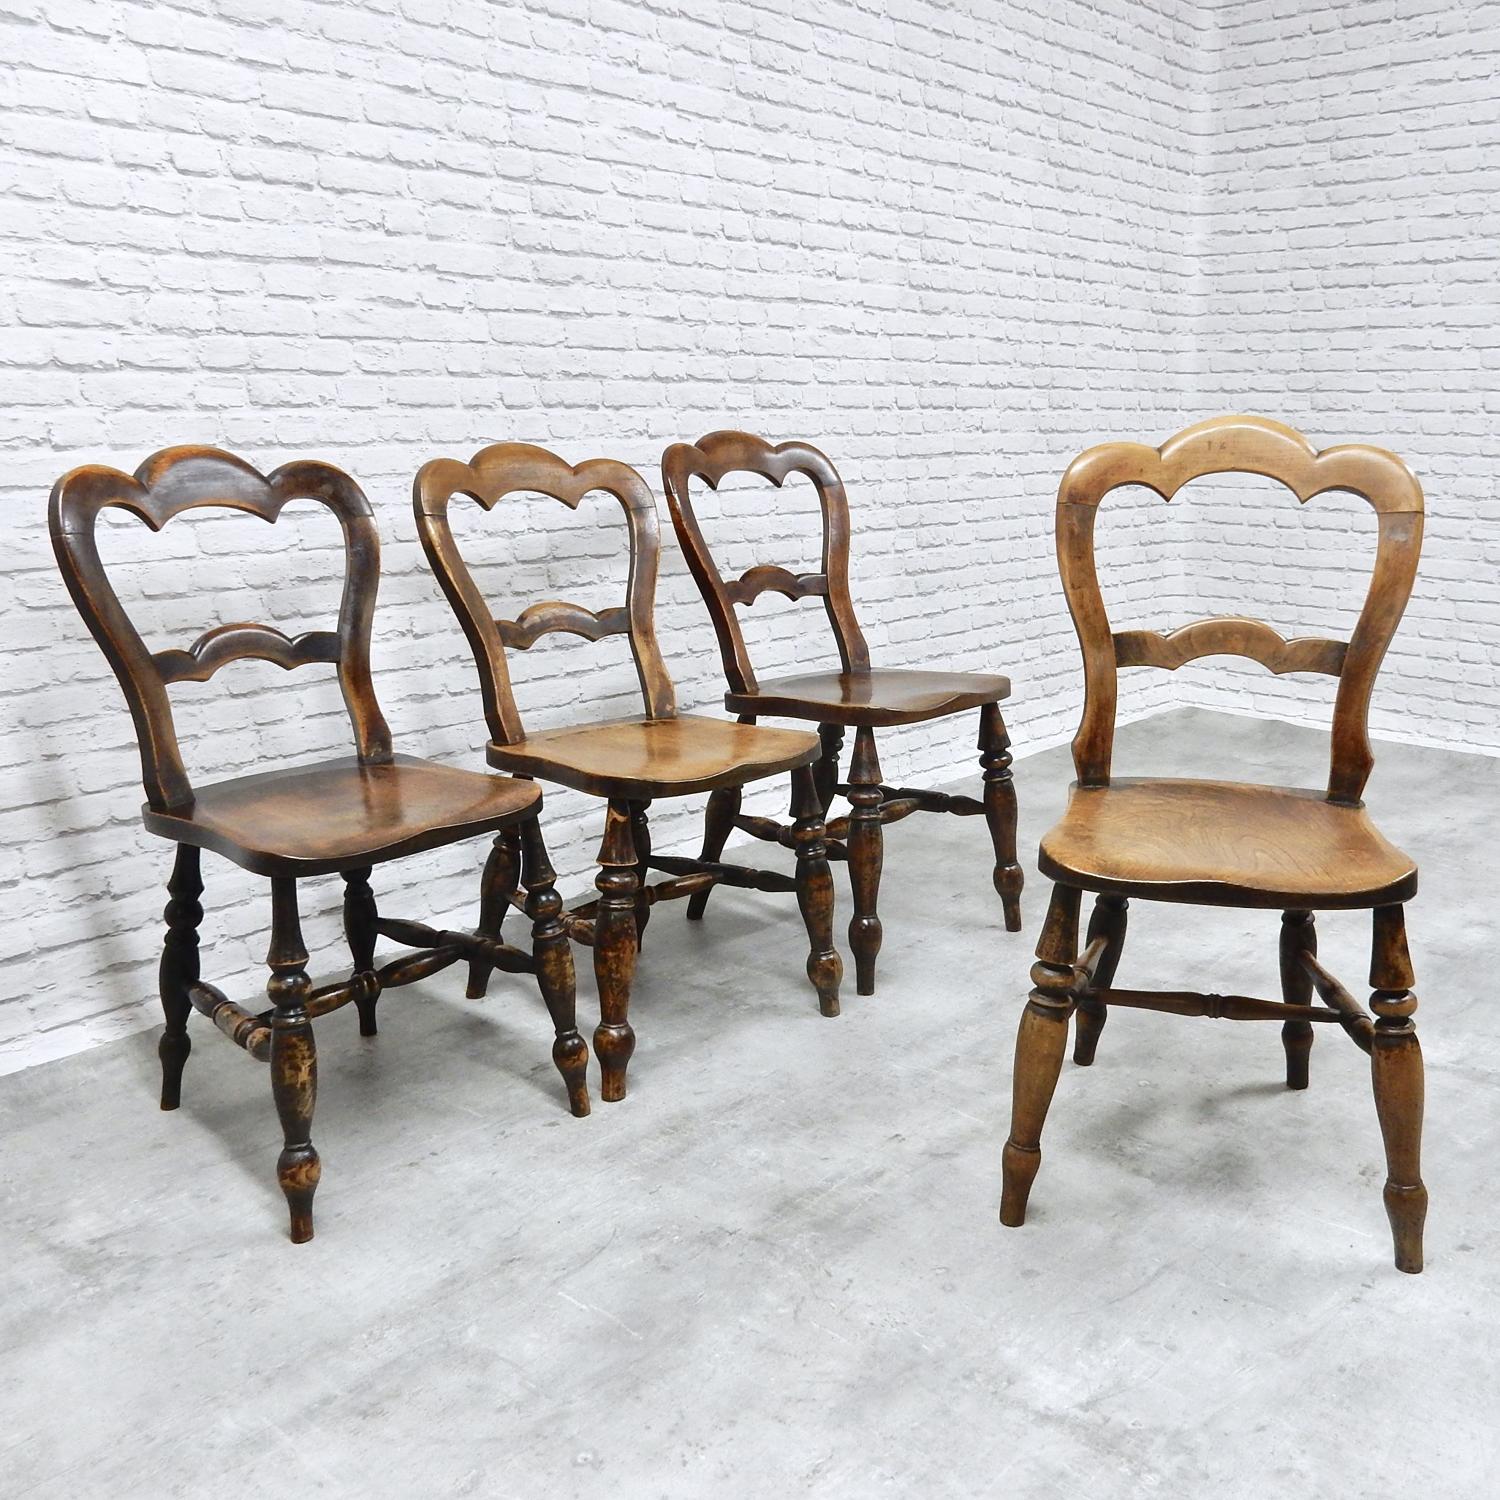 Country Kitchen Windsor Chairs